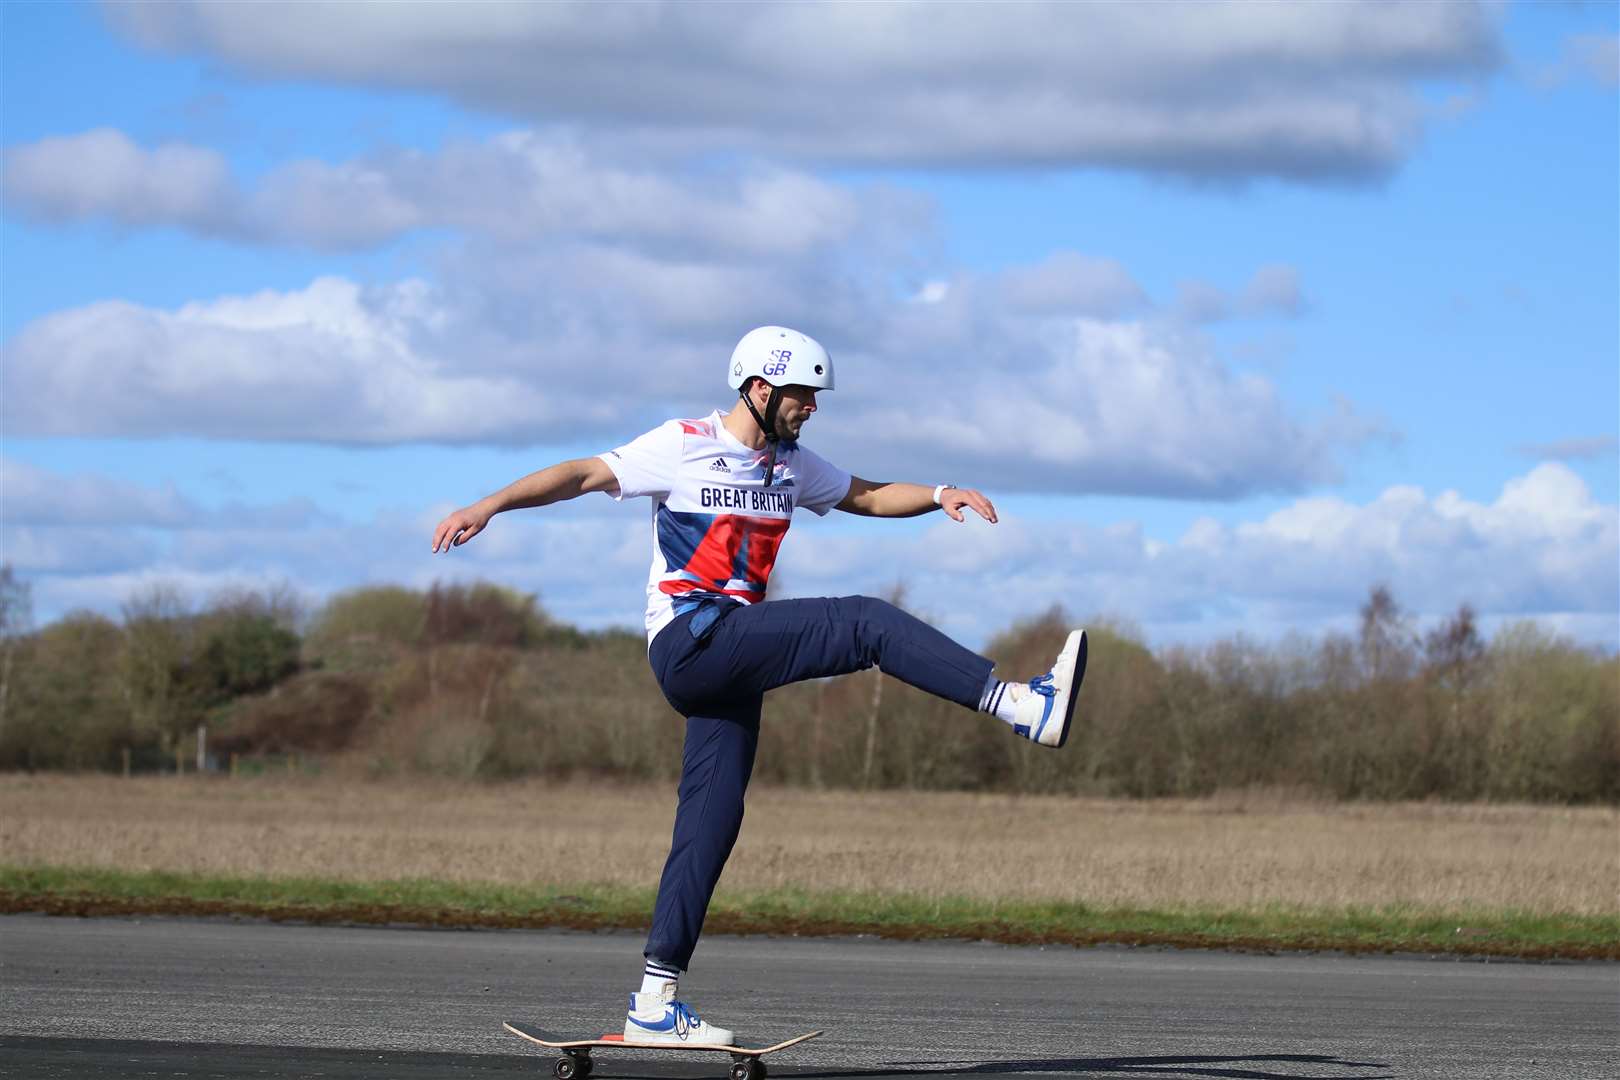 Mr Swain also hopes to be the fastest person to skateboard 100 metres (Paul Swain)